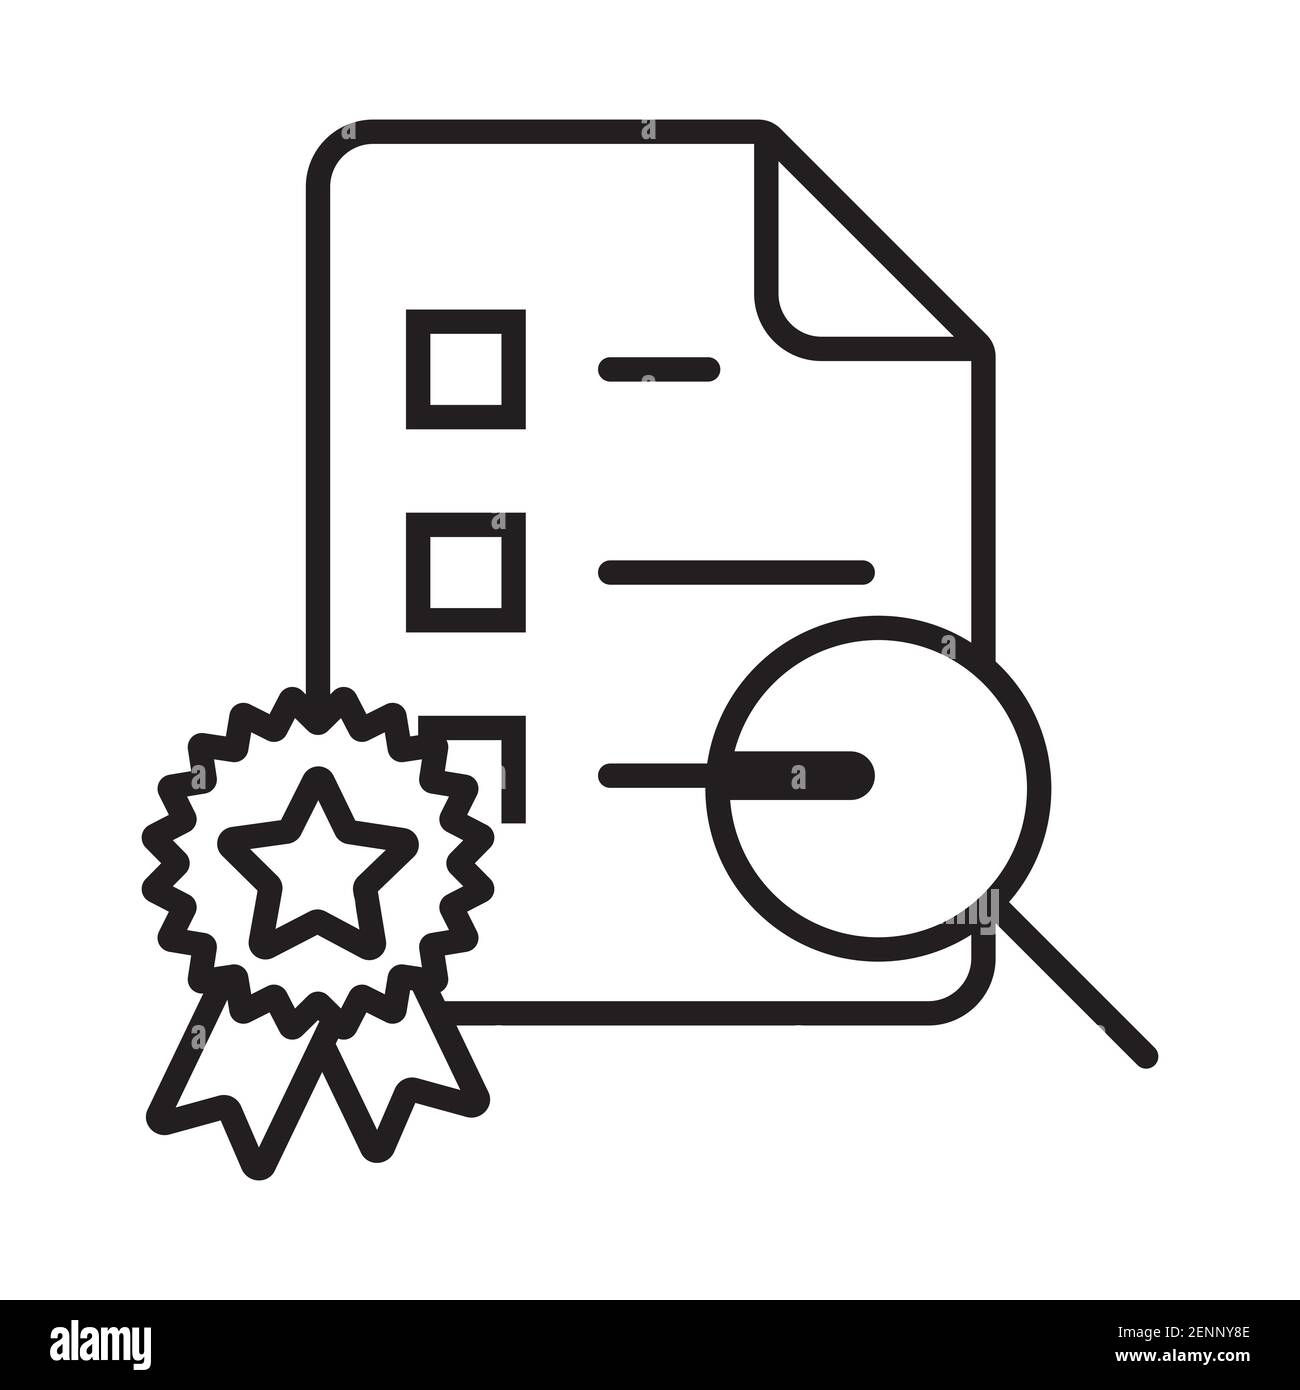 Line art icon of scientific research for apps and websites Stock Vector